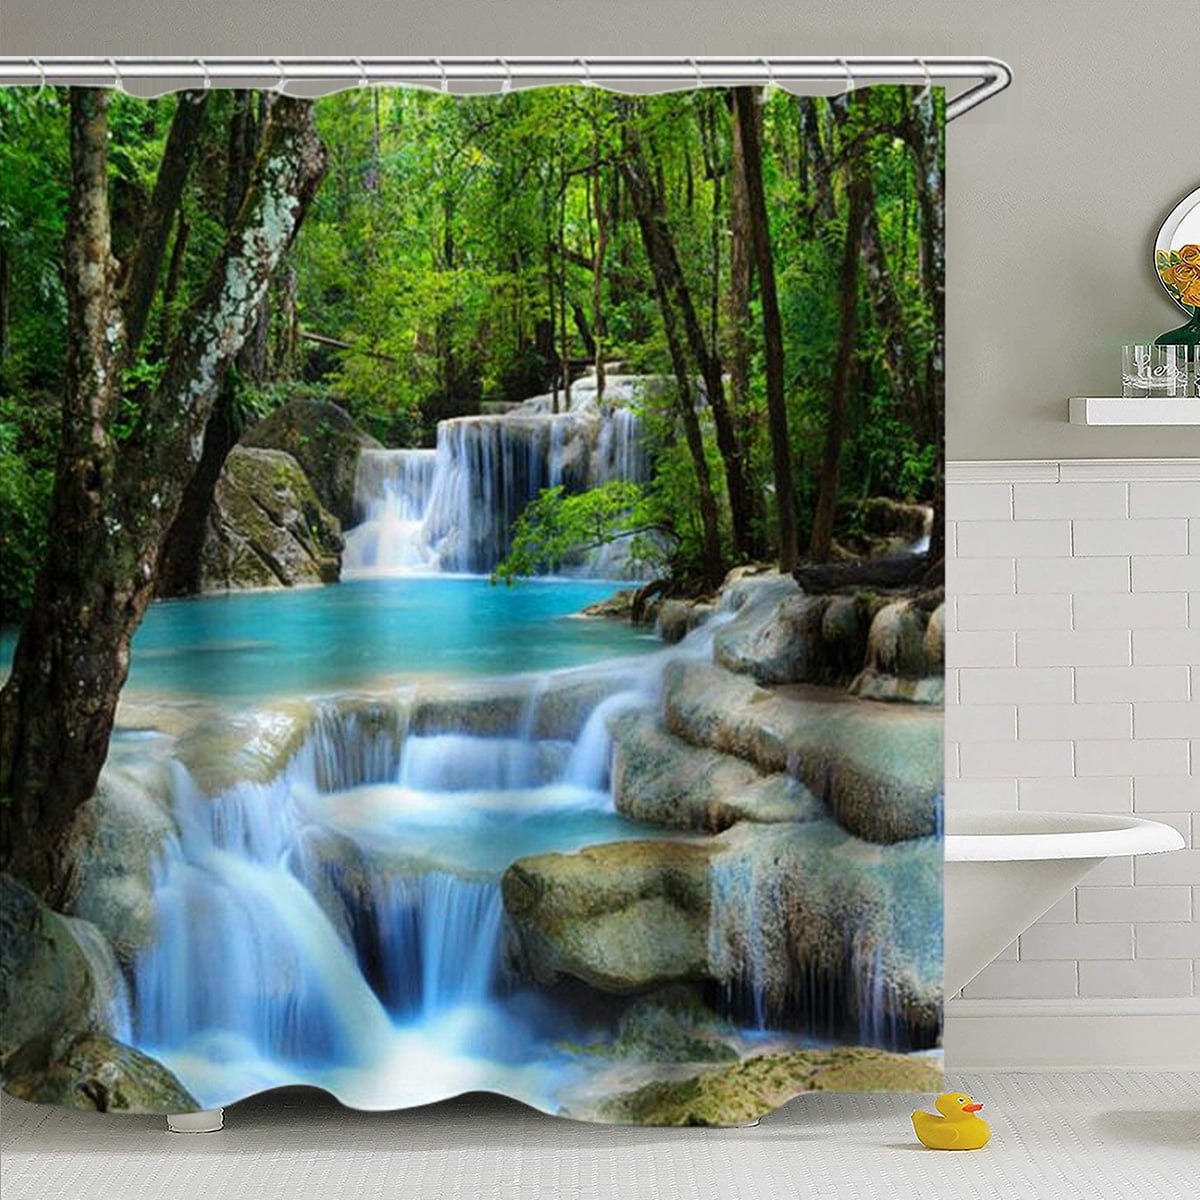 Details about   Autumn Golden Forest Waterfall Scenery Shower Curtain Bathroom Accessory Sets 